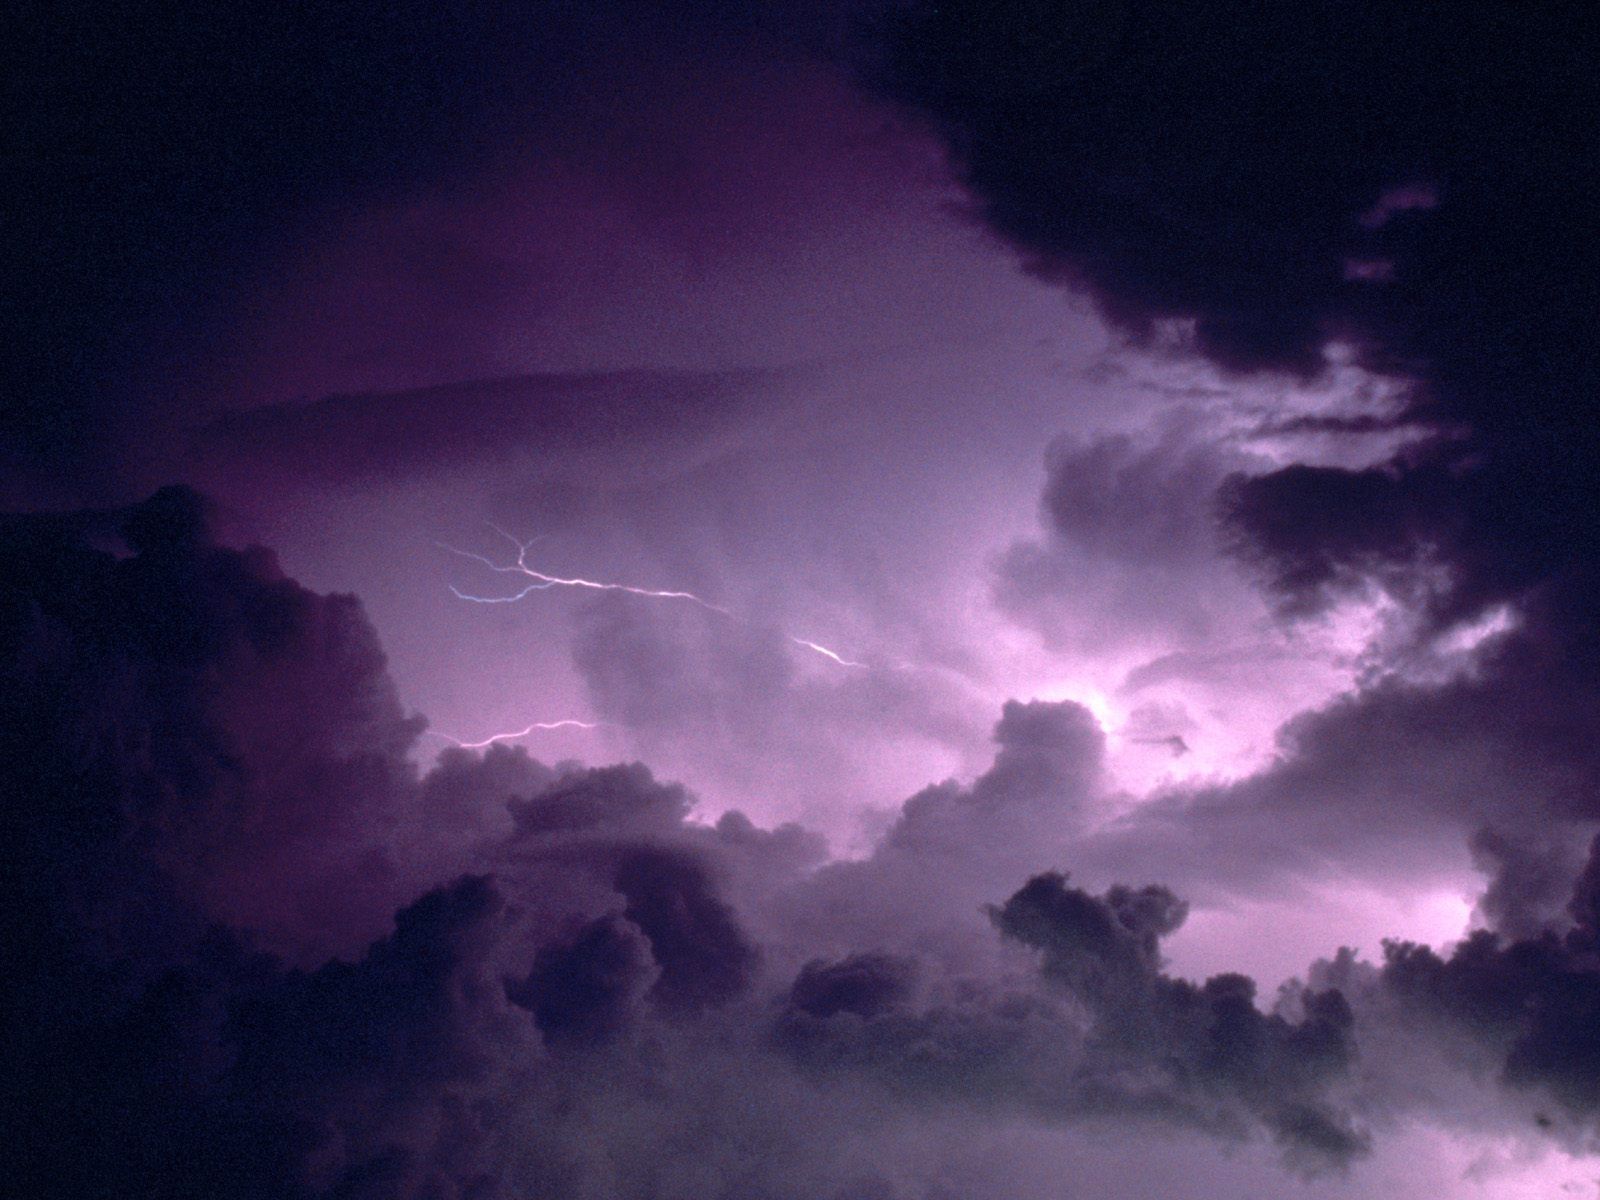 Stormy Weather Wallpaper Image featuring Storms. Weather wallpaper, Storm wallpaper, Stormy weather